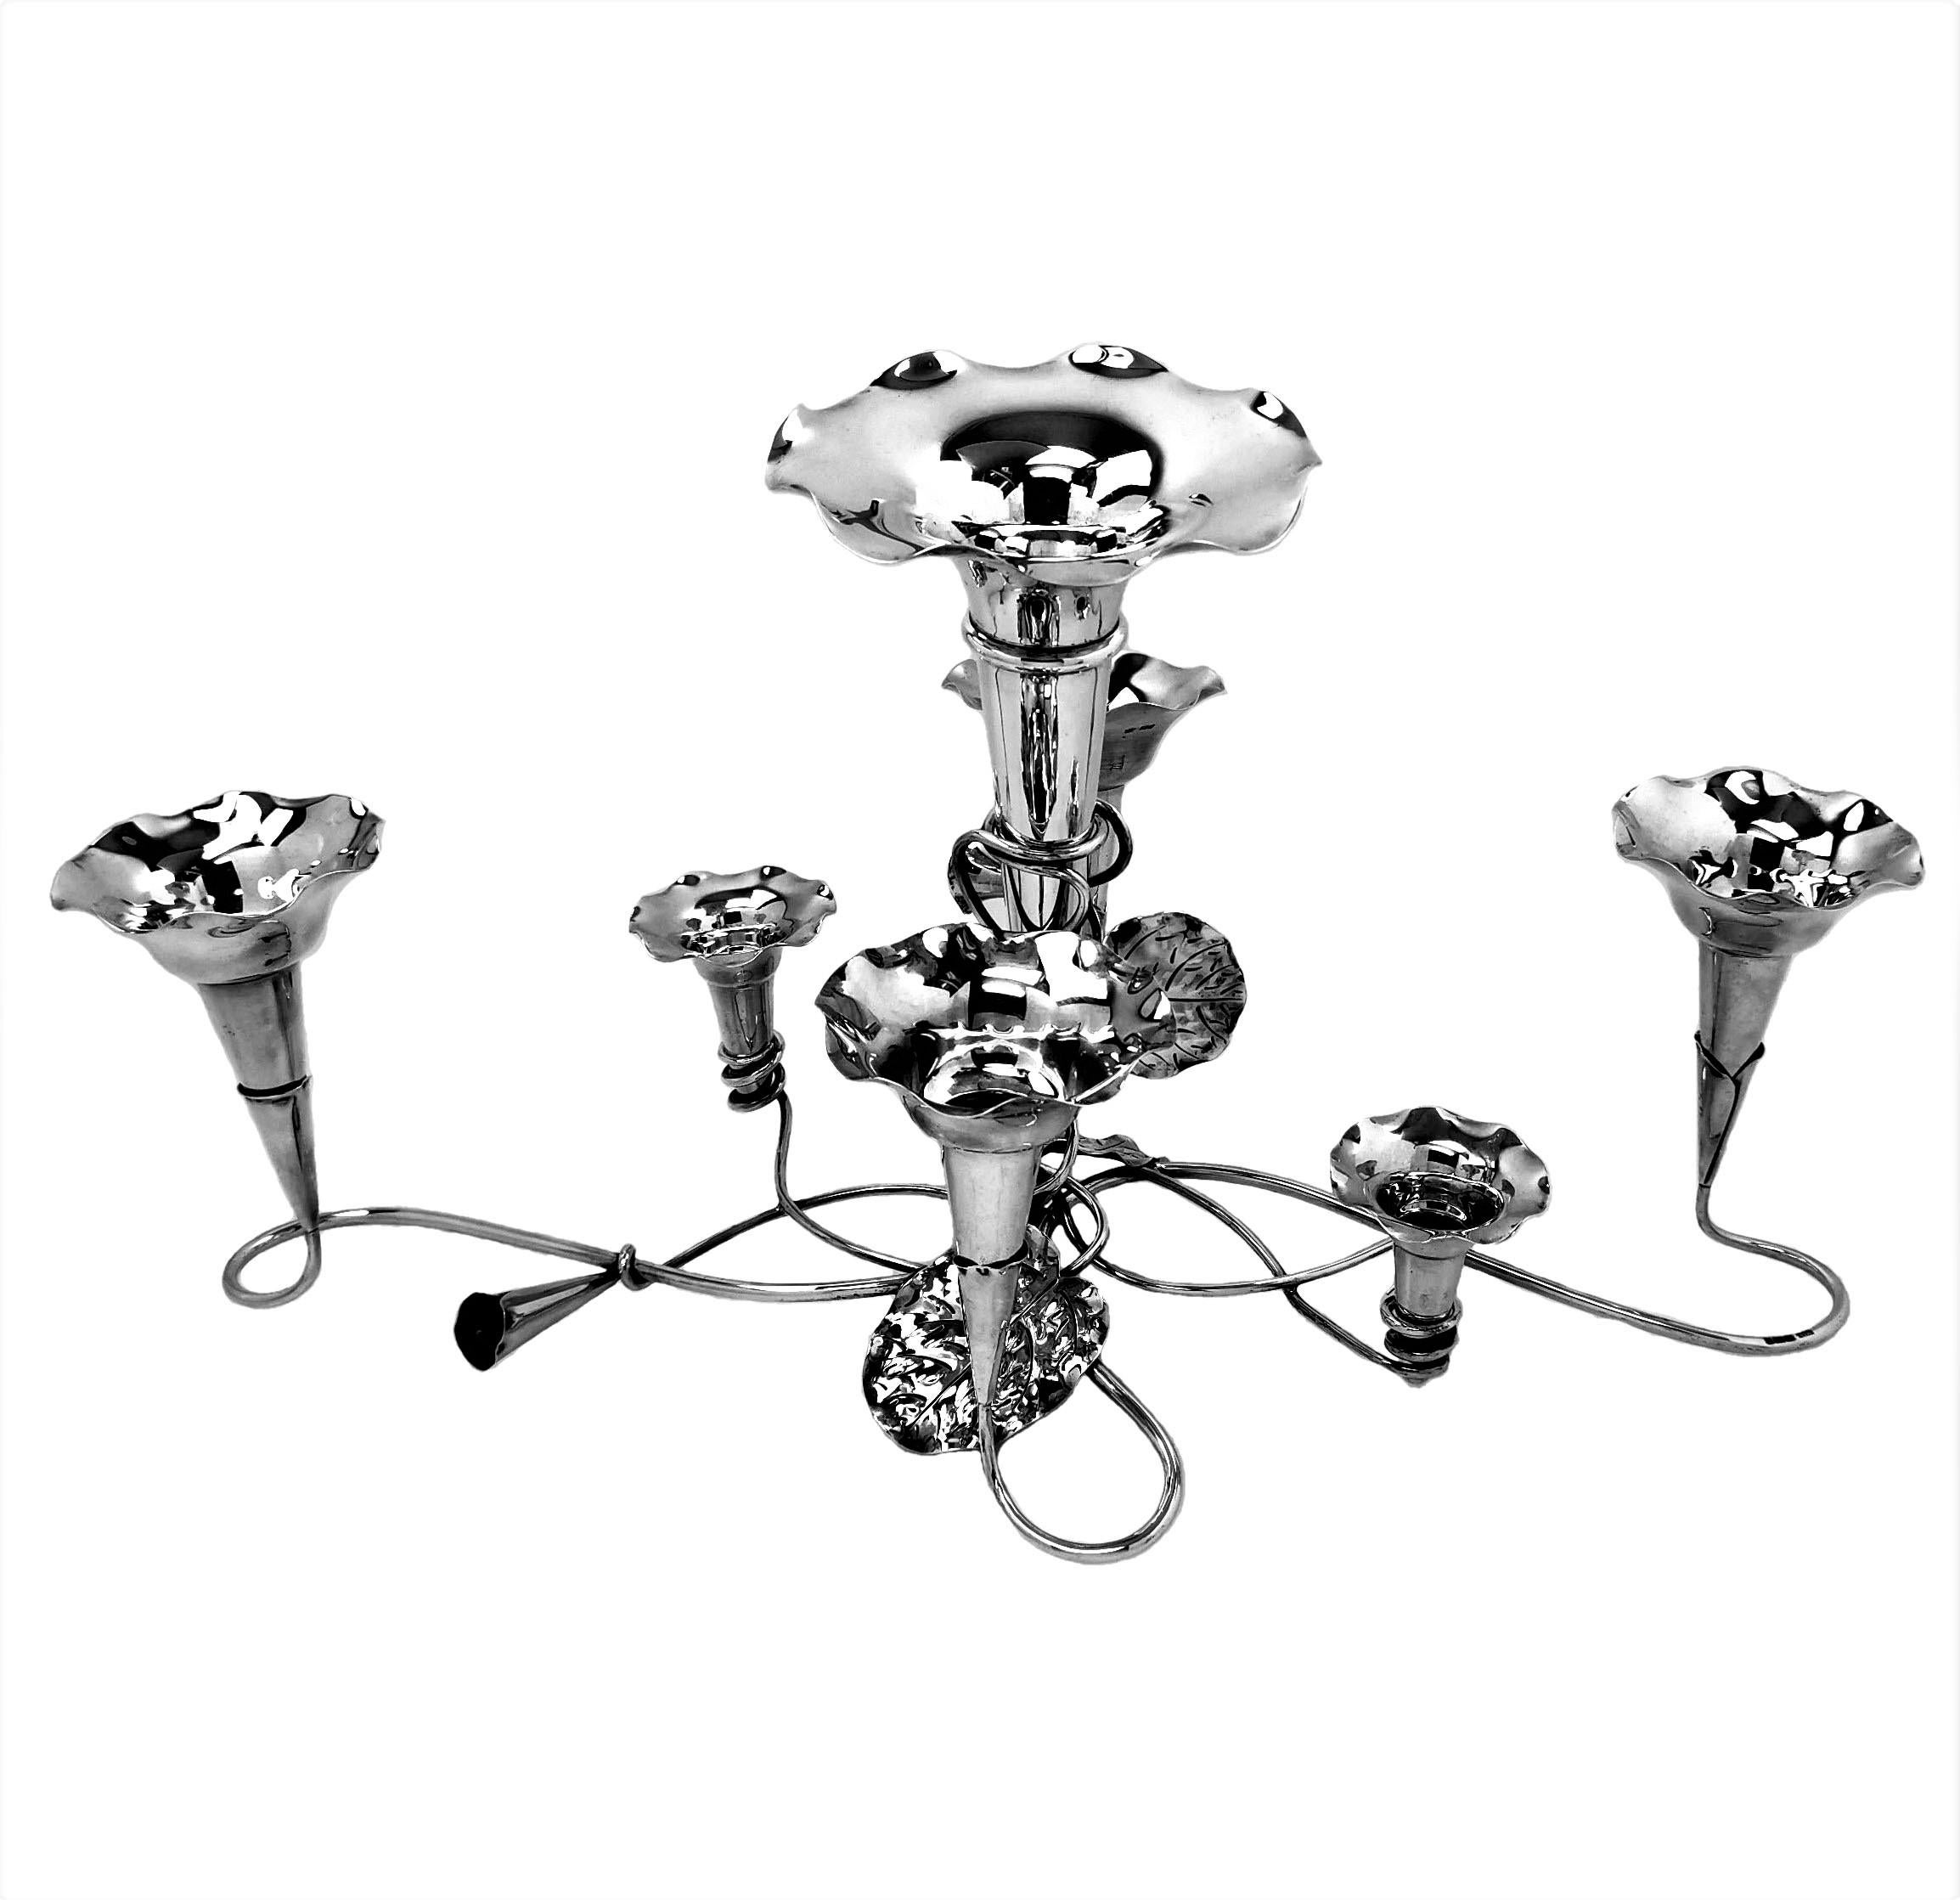 A beautiful Antique solid Silver Epergne in an elegant trailing flower design with 7 trumpet Vases arranged as stylised flowers on the branches of the centrepiece. 

Made in Sheffield, England in 1910 by Mappin & Webb.

Approx. Weight - 1112g /